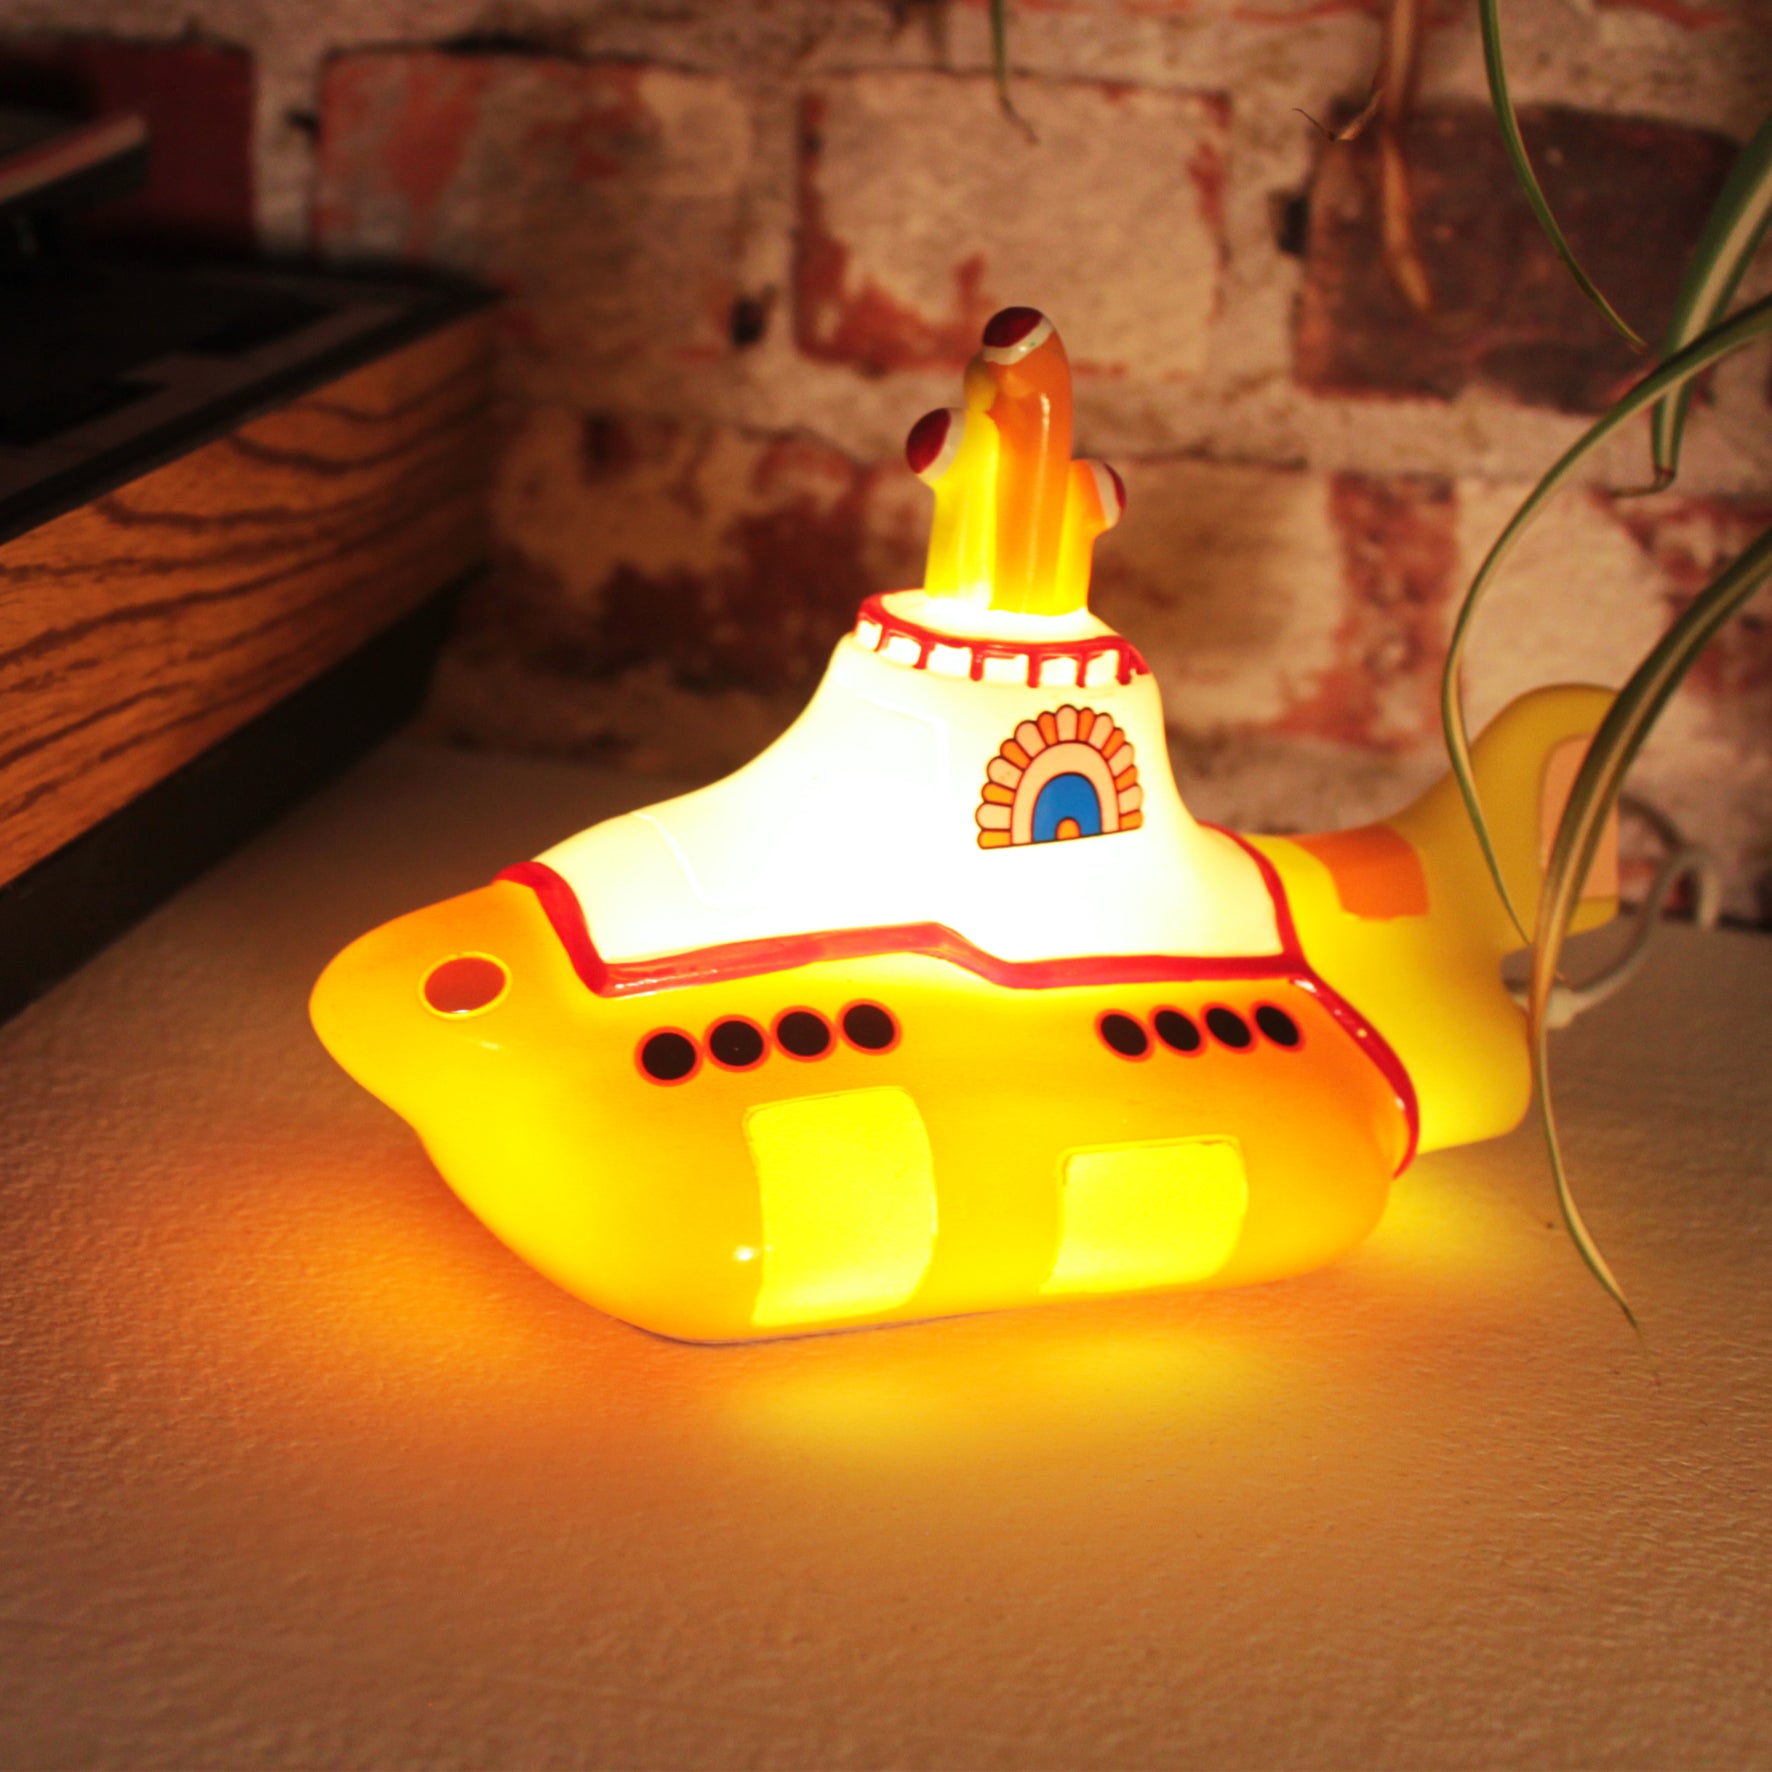 The Beatles Yellow Submarine lamp, with a warm yellow glow